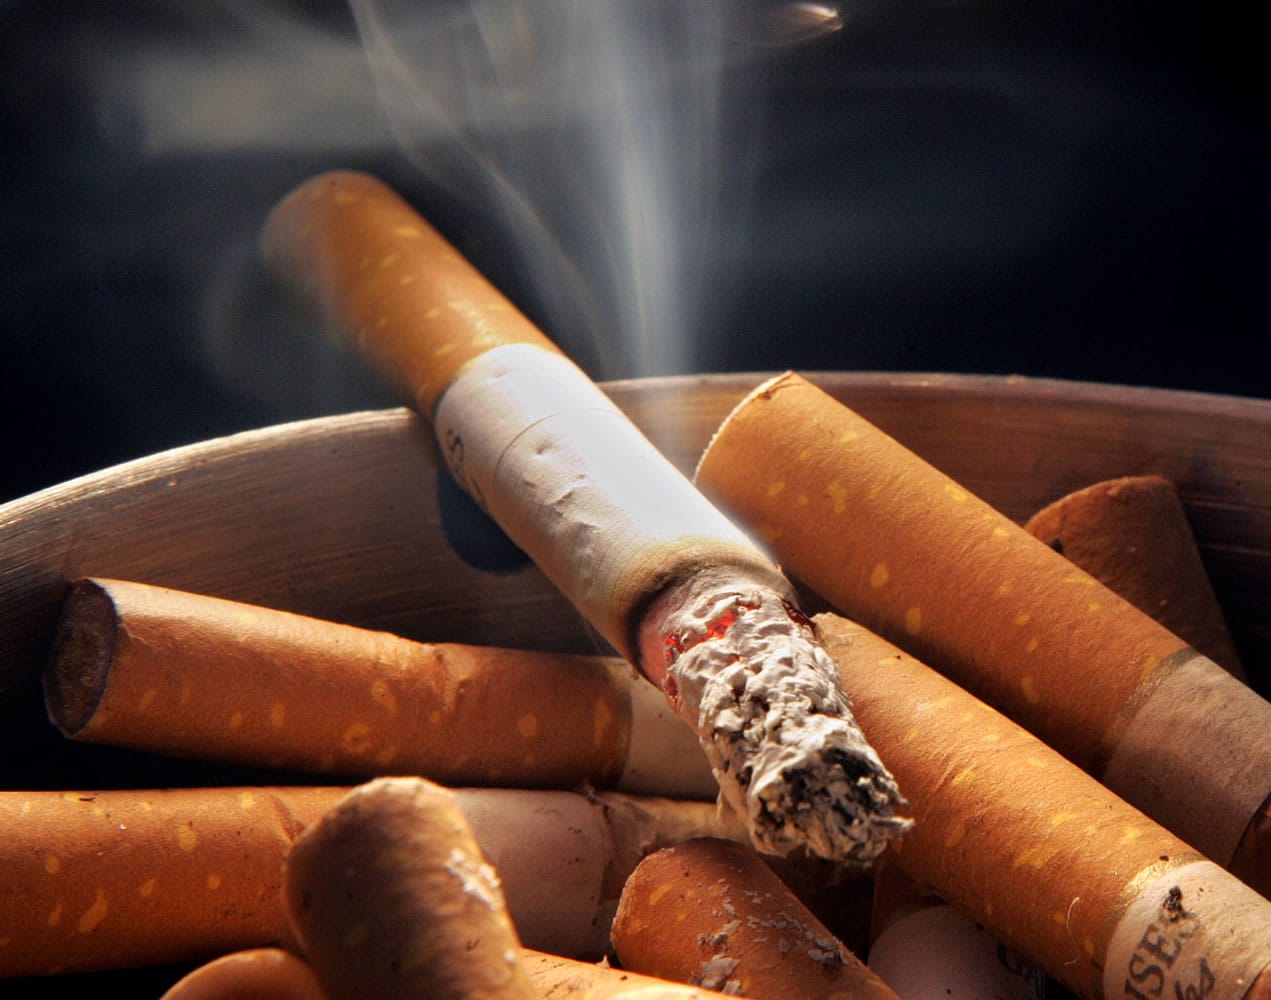 Roughly 90 percent of lung cancer cases are attributed to smoking.